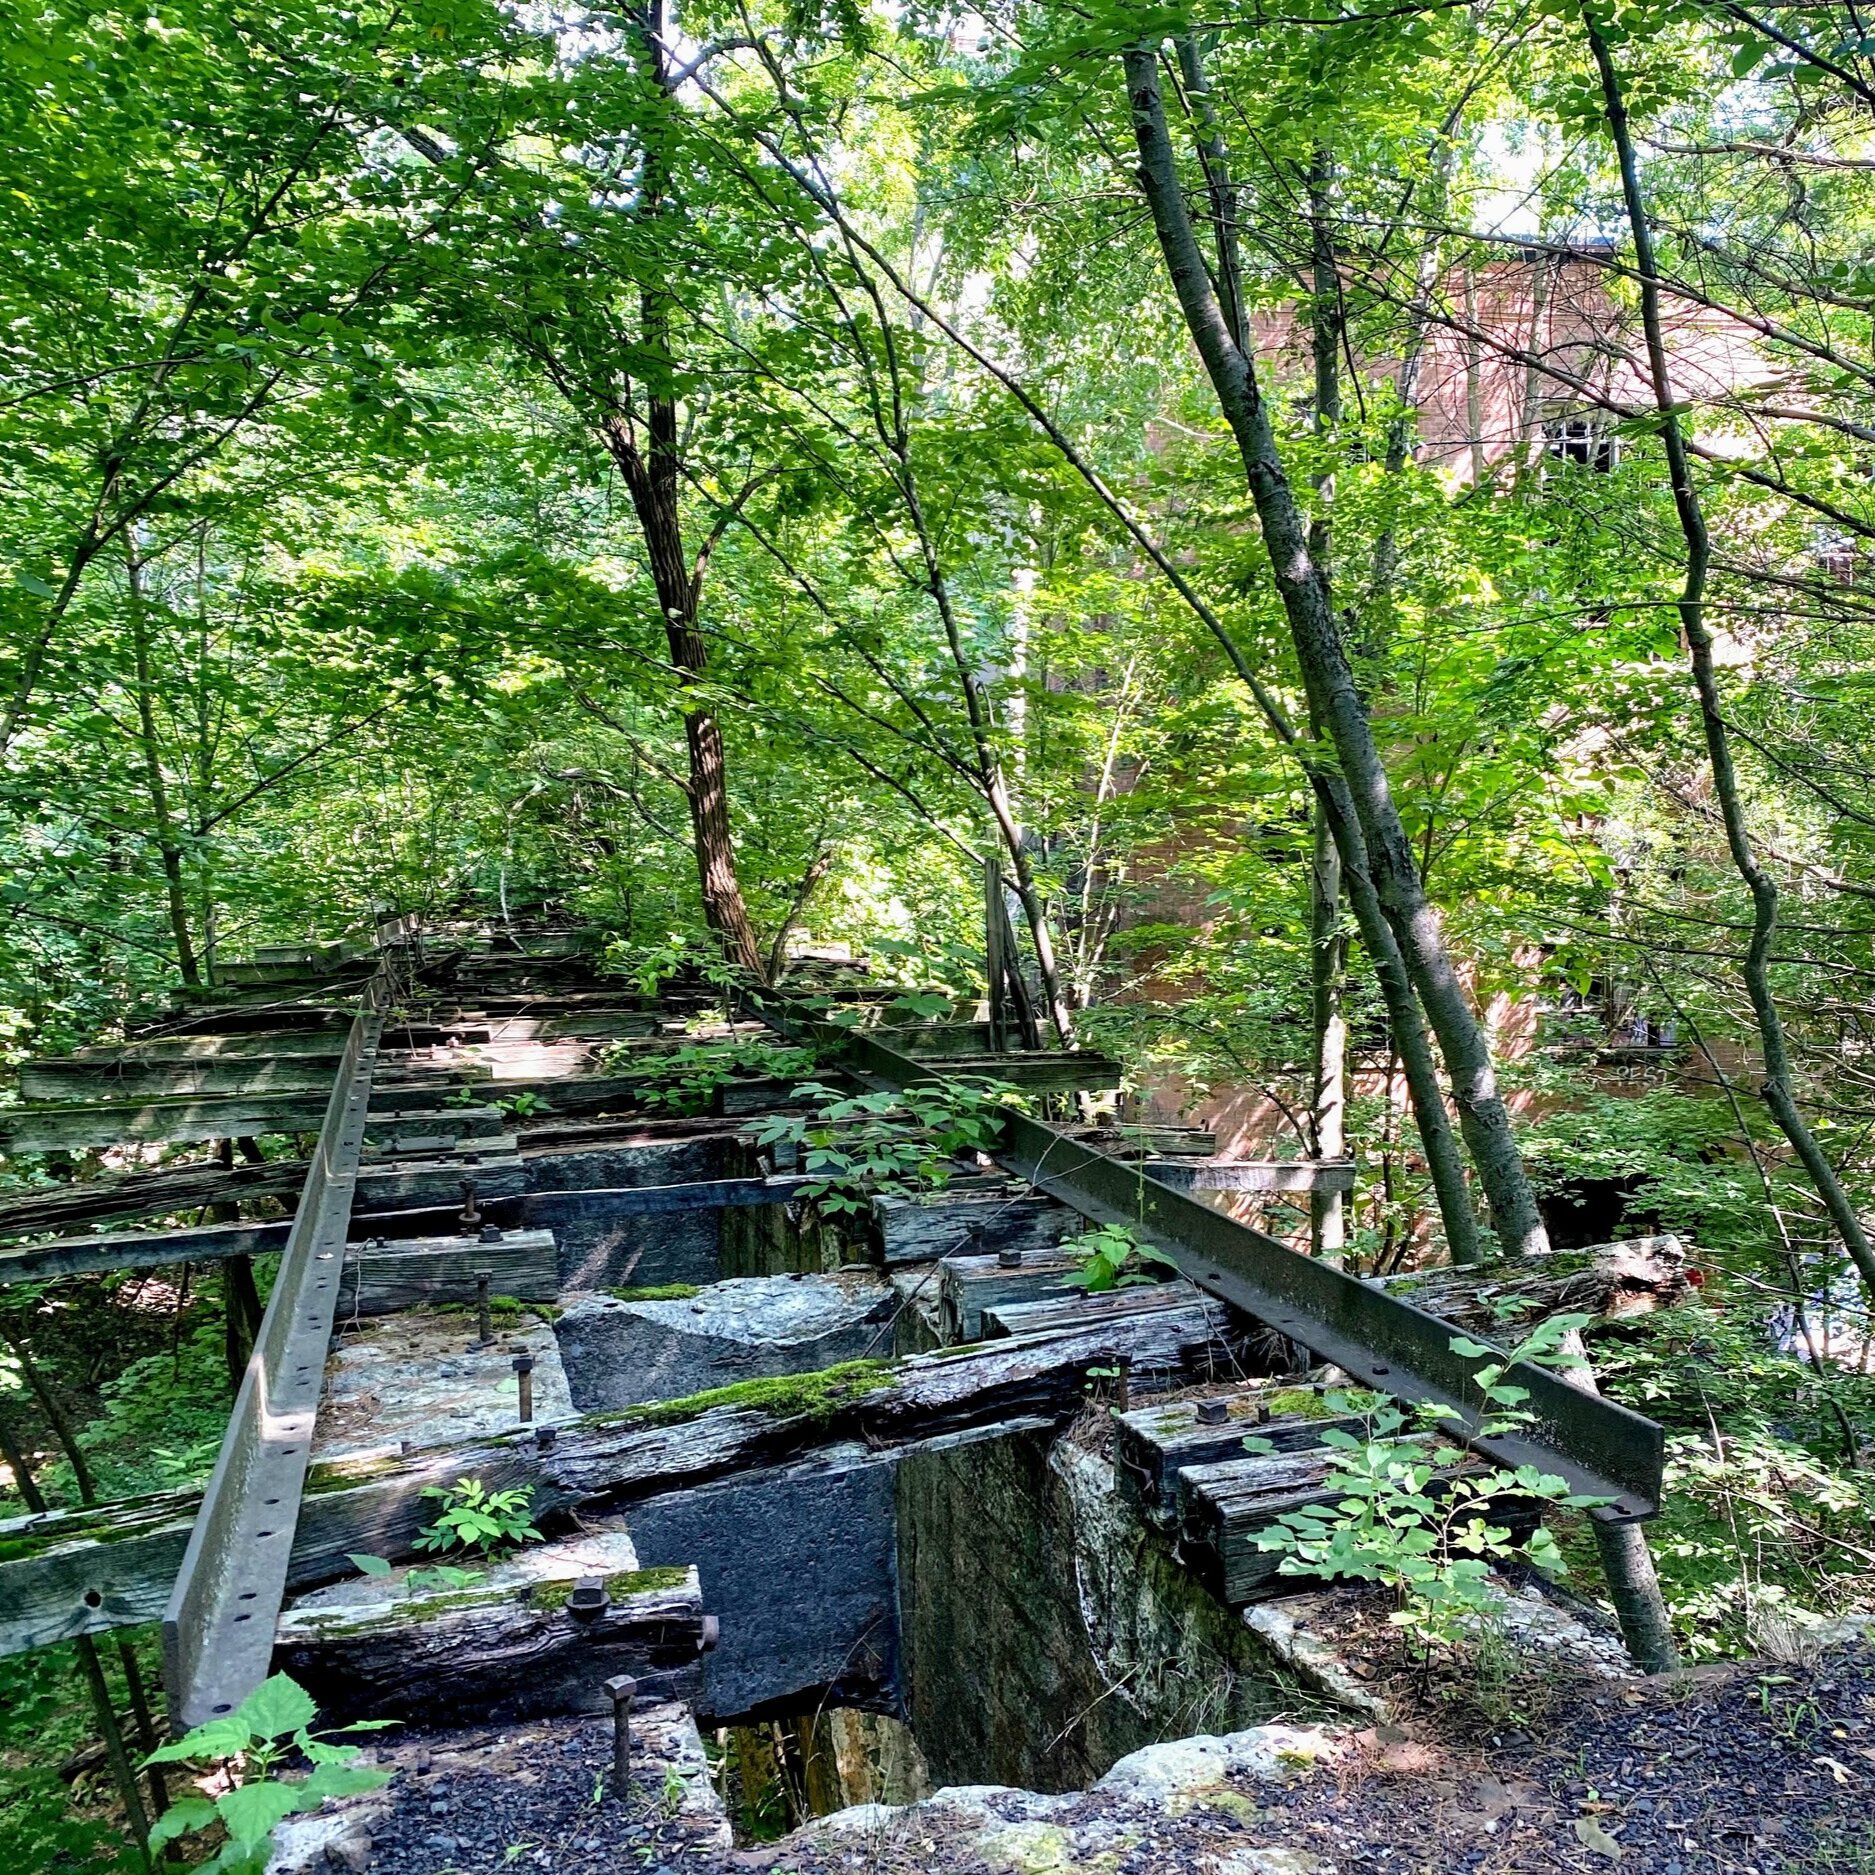 Remnants of an elevated train line connecting to the powerhouse